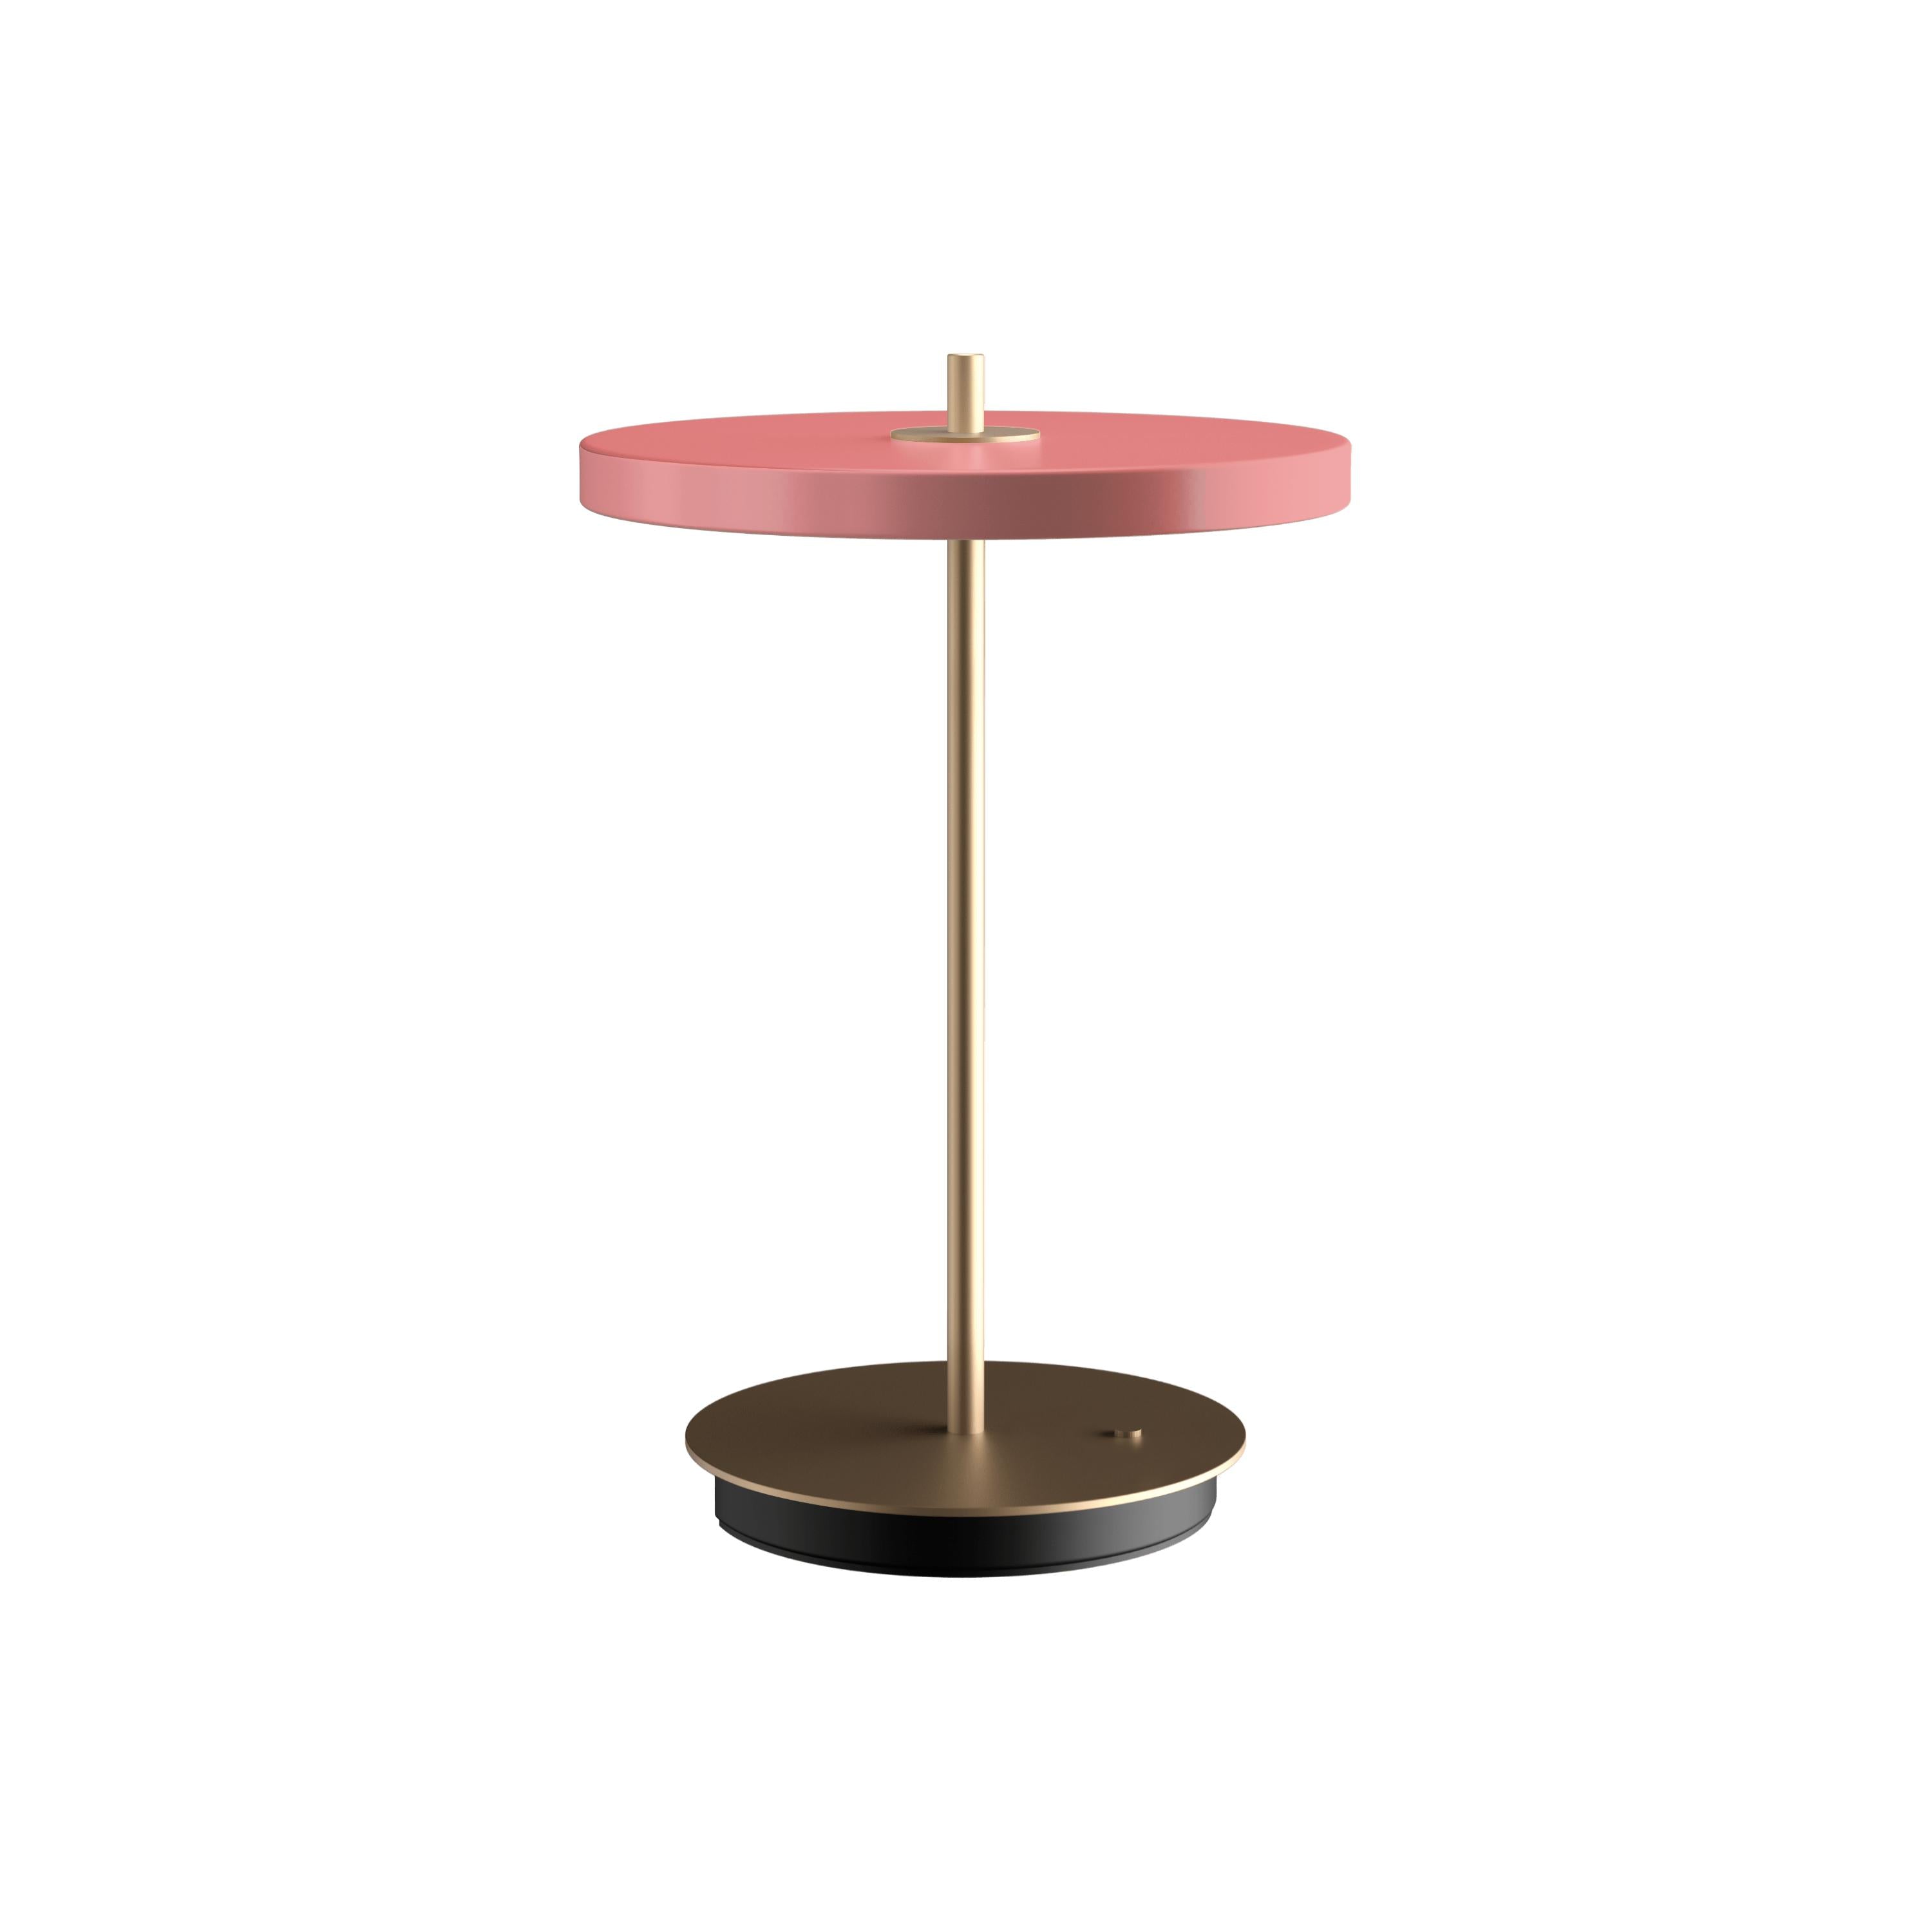 Umage Asteria Moving Table Lamp, Nuance Rose V2